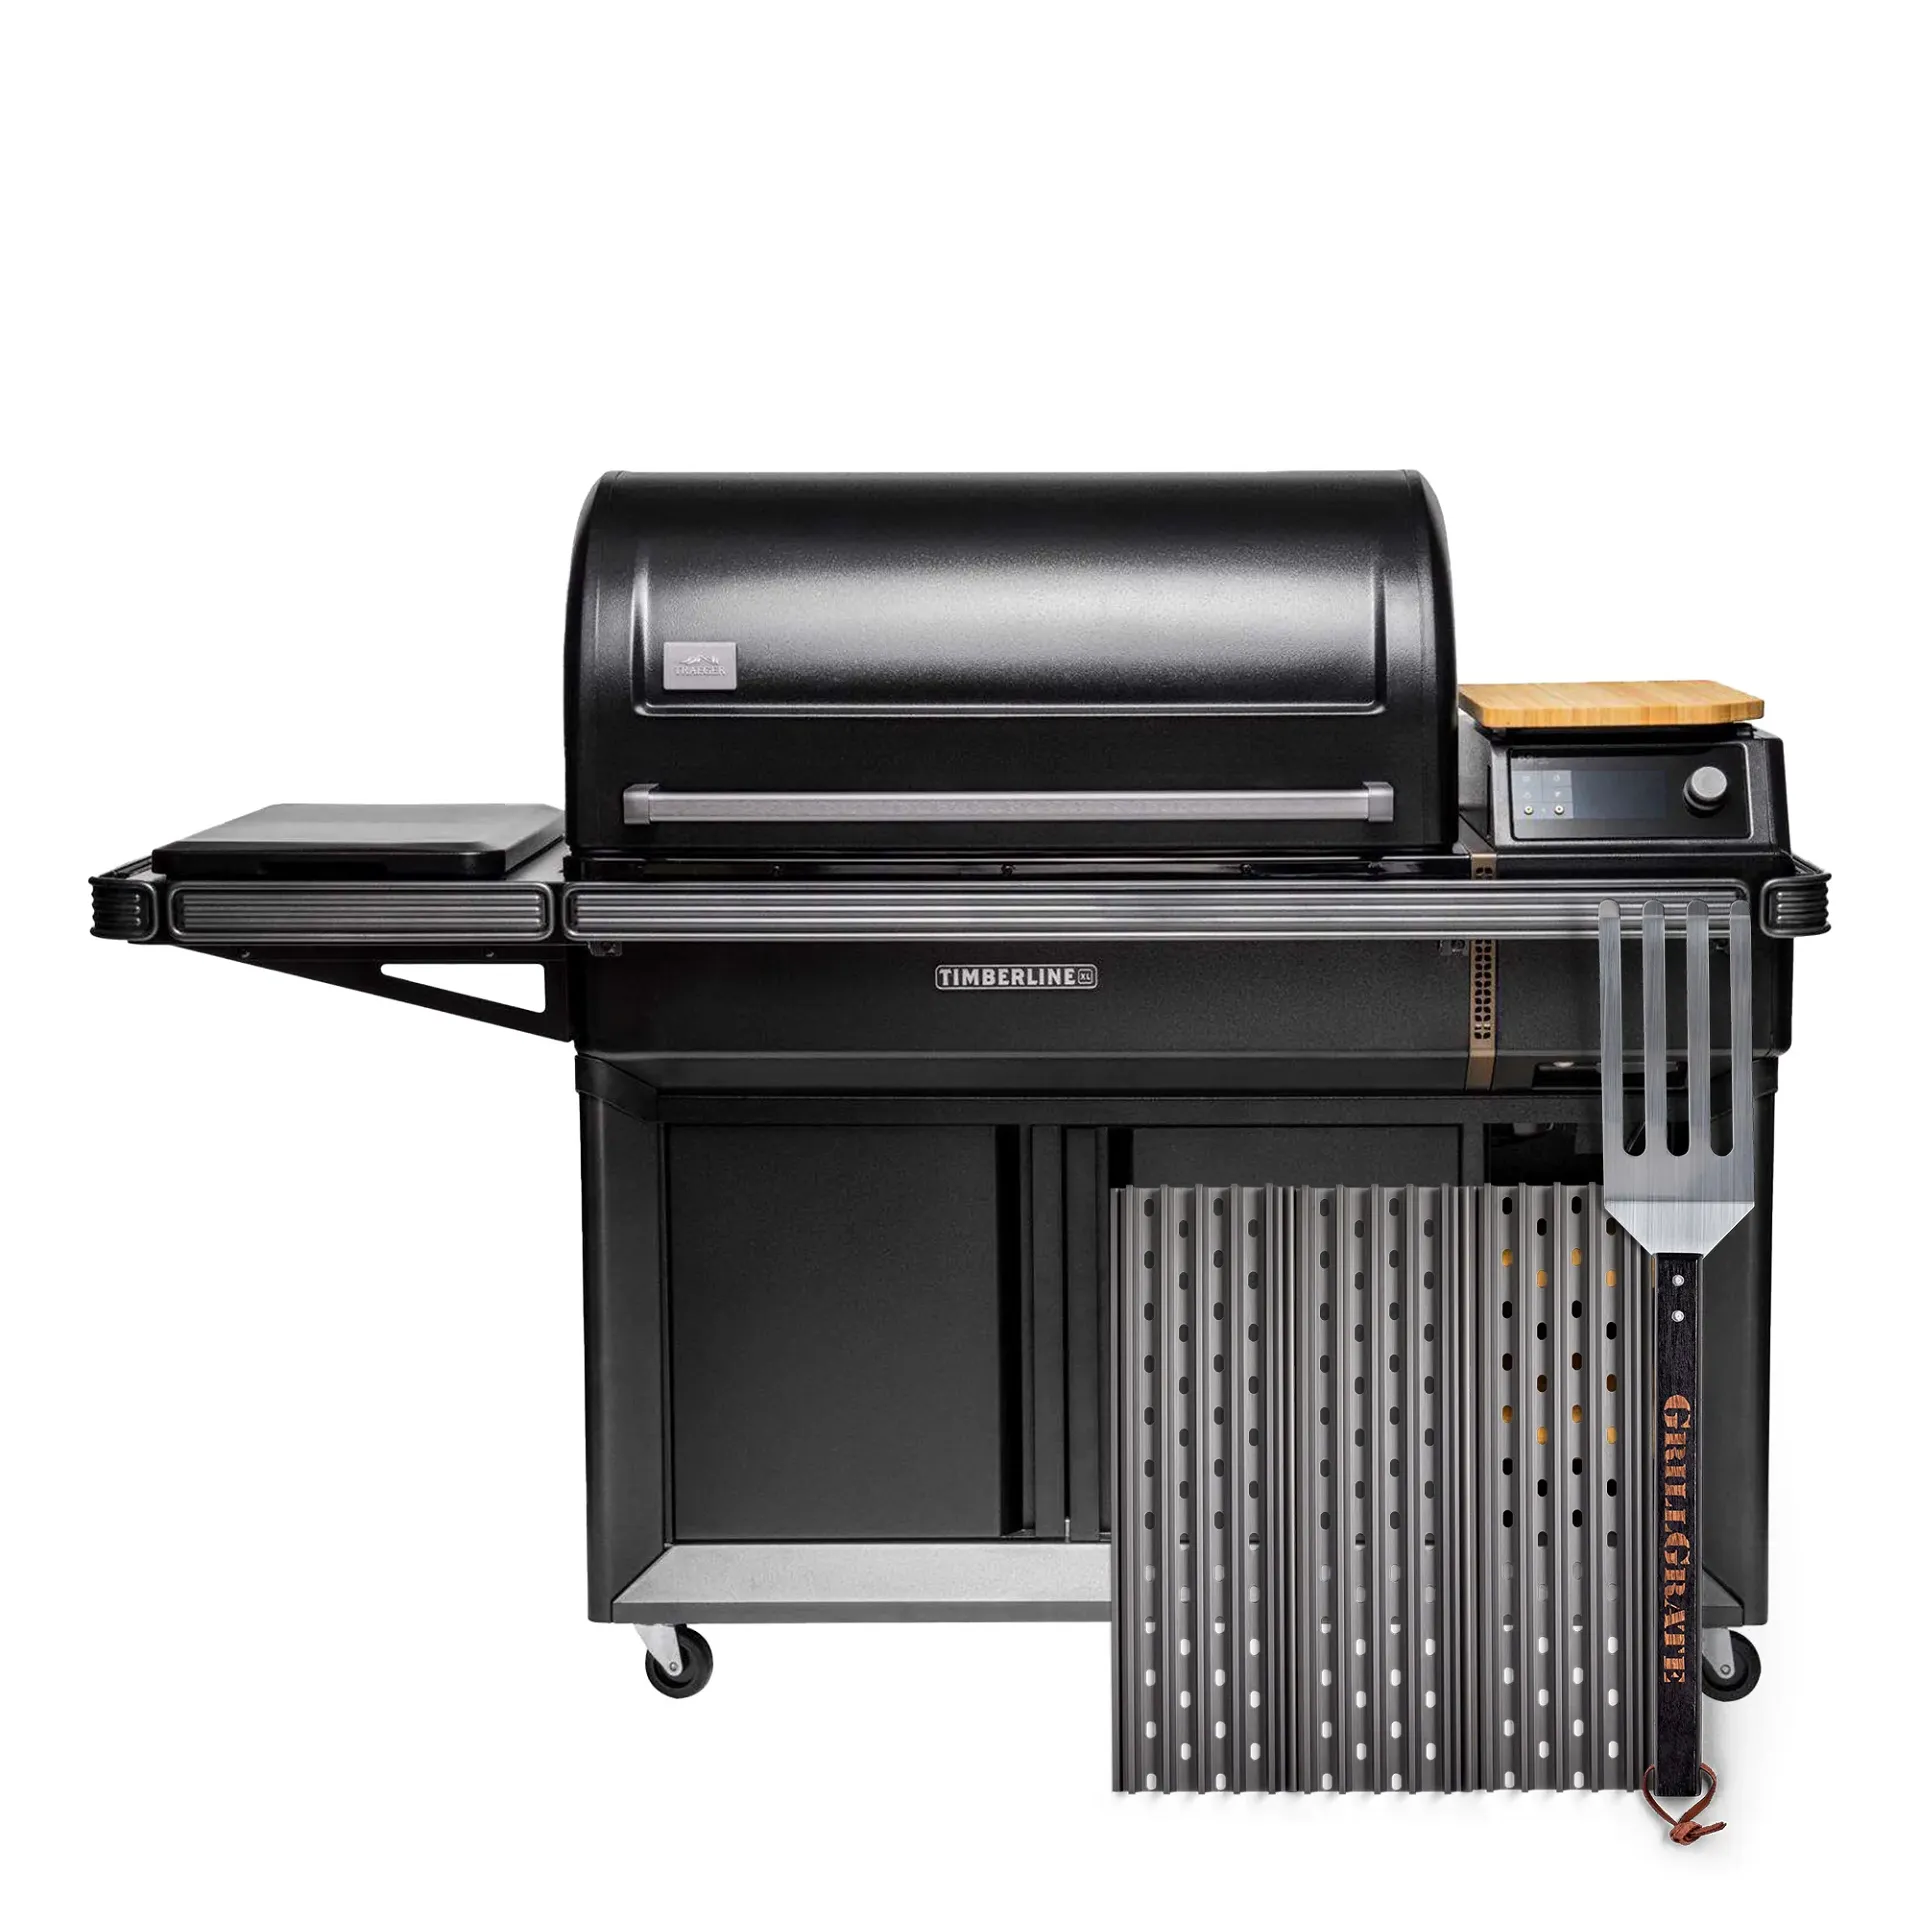 Traeger's redesigned Timberline is full of smart grilling tech